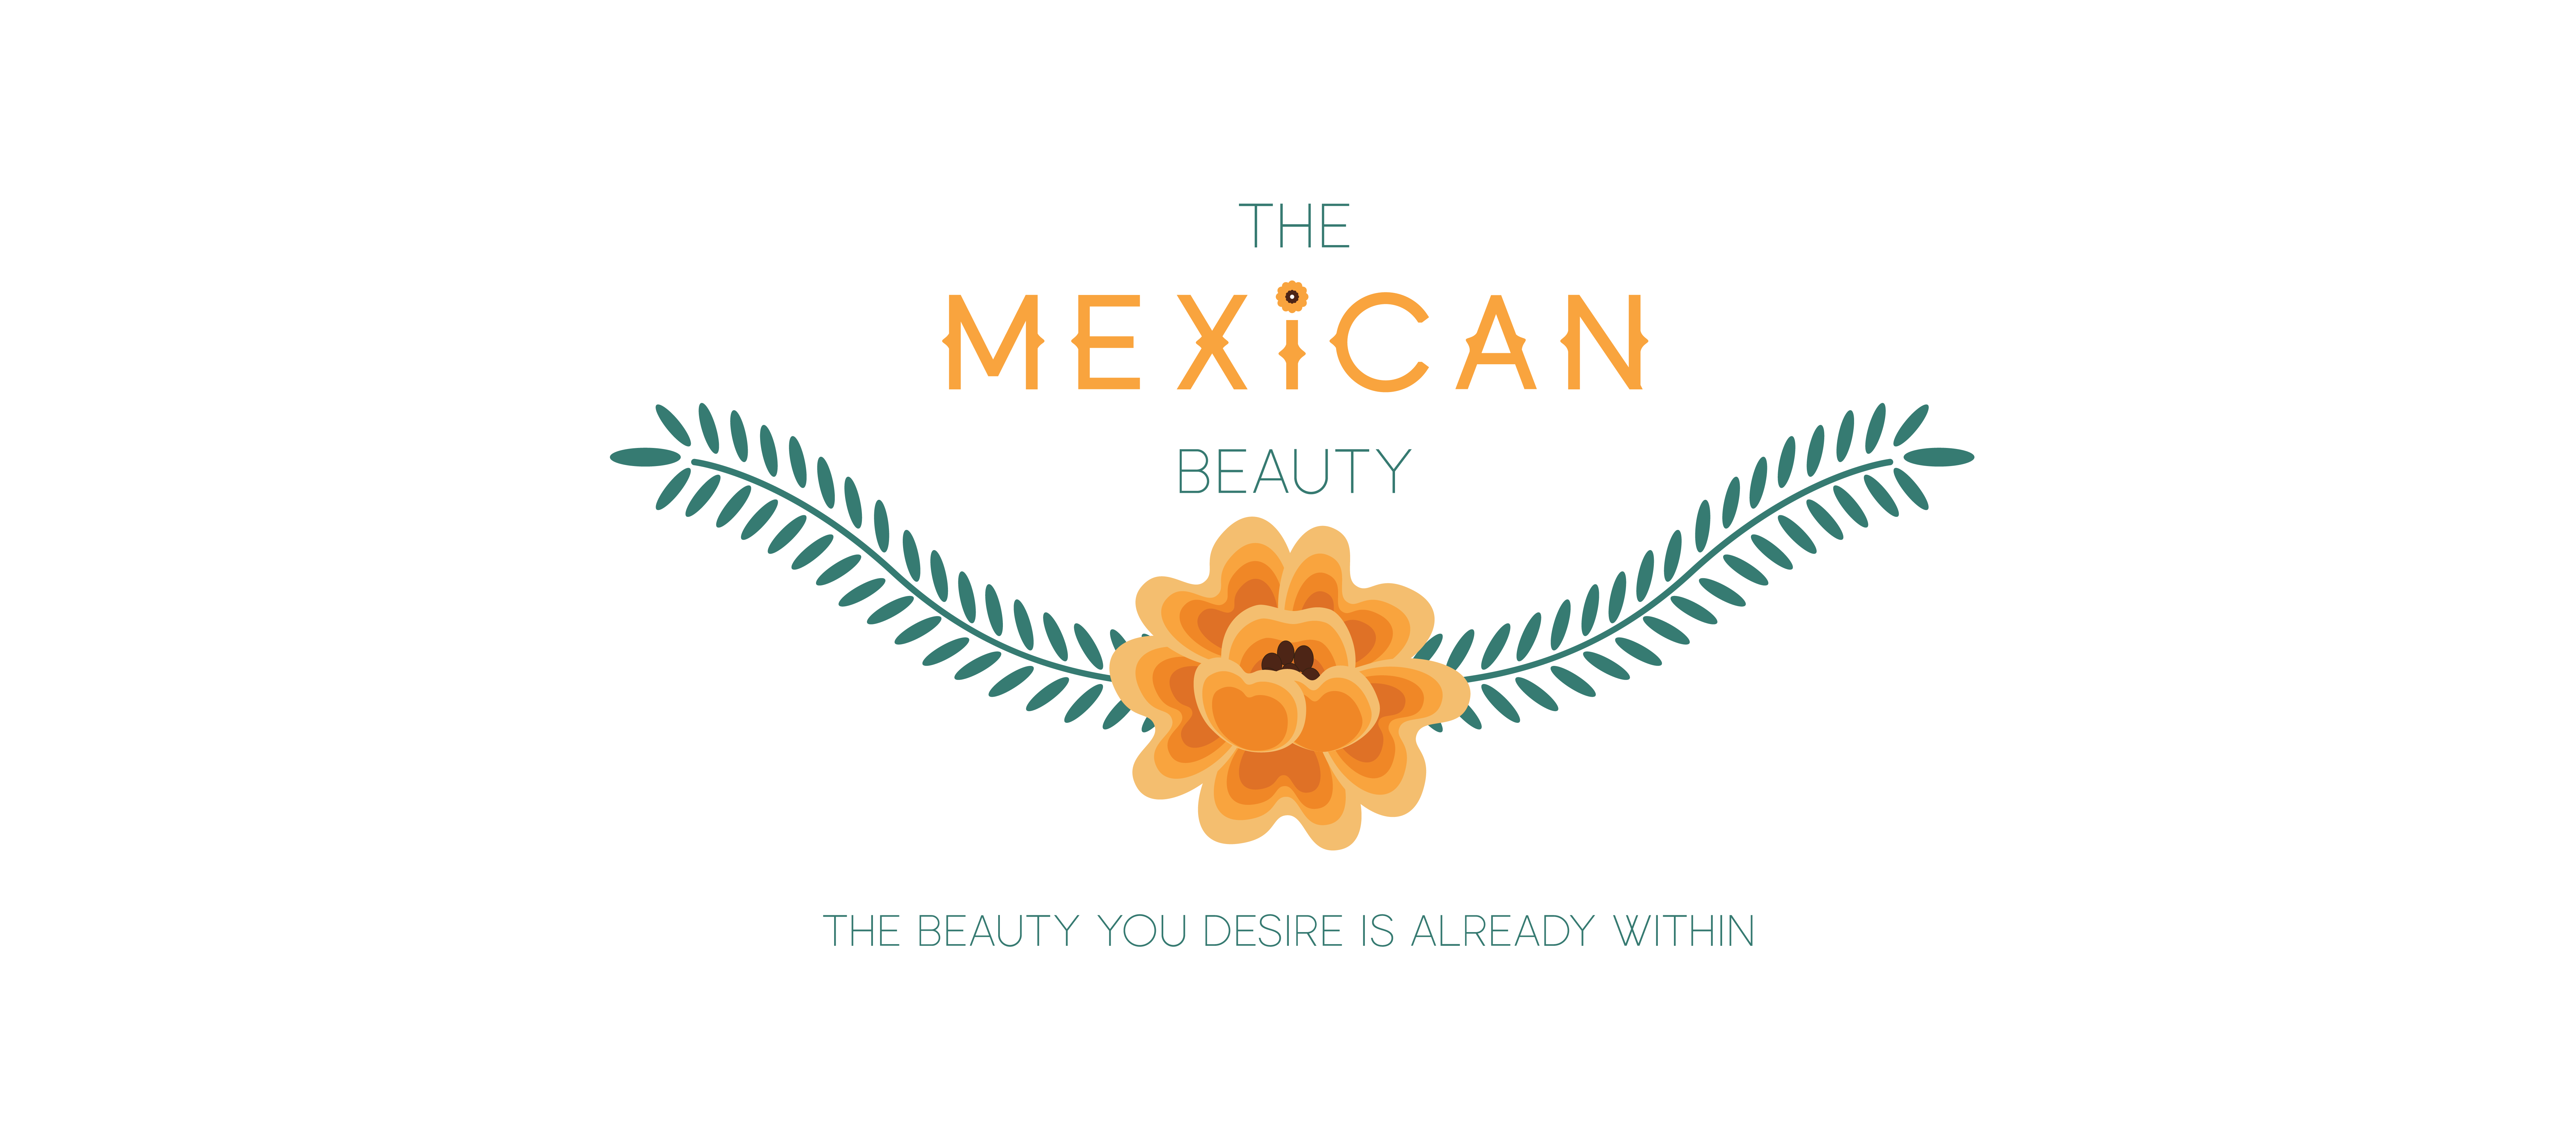 The Mexican Beauty